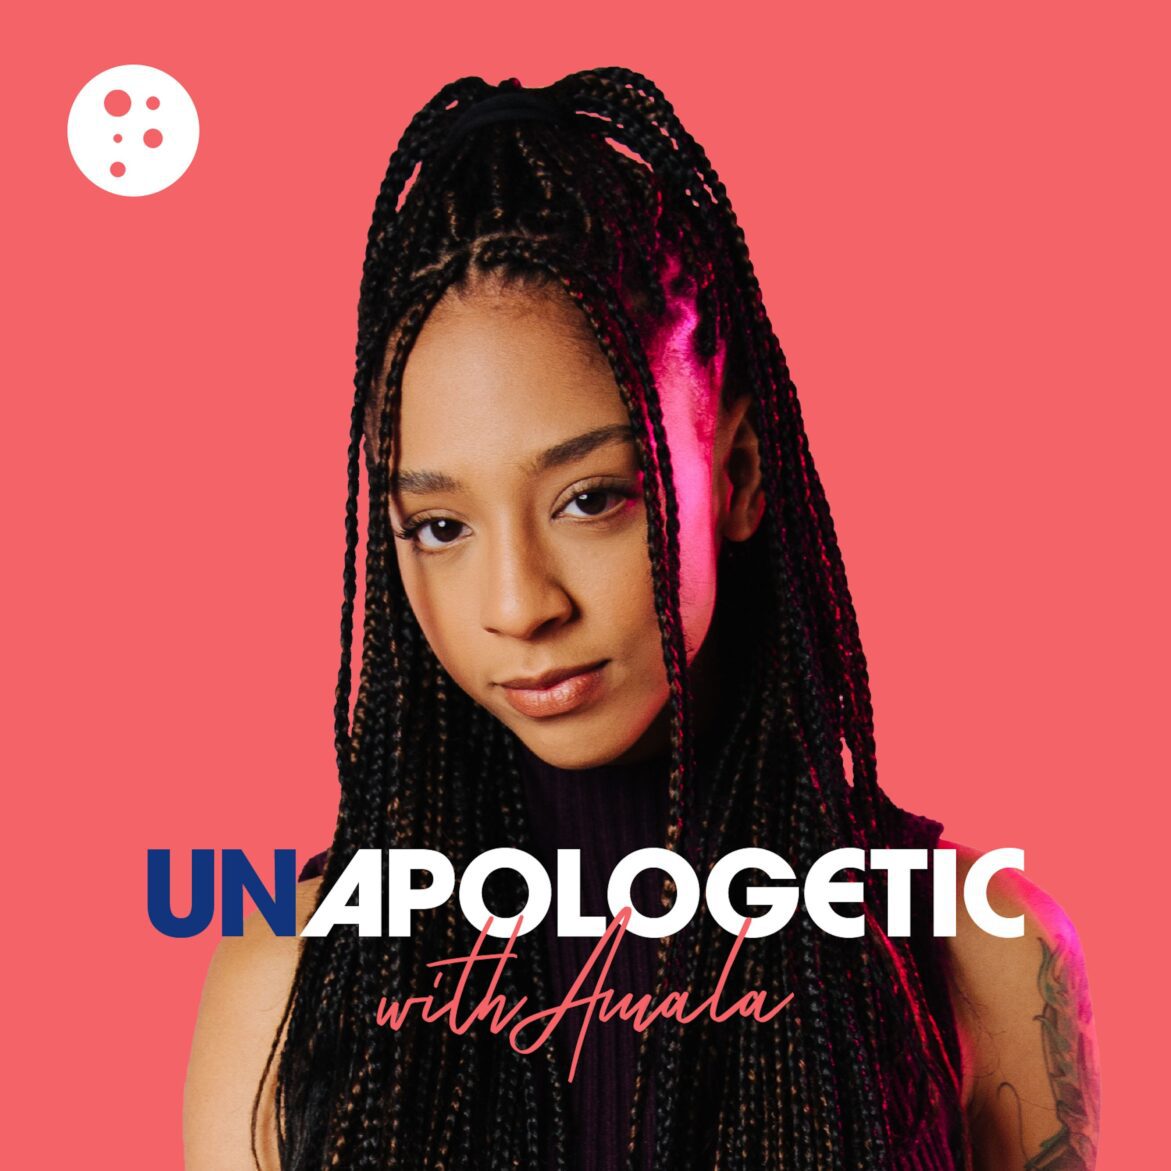 Black Podcasting - Never Date A Woman With A High Body Count? - Unapologetic LIVE